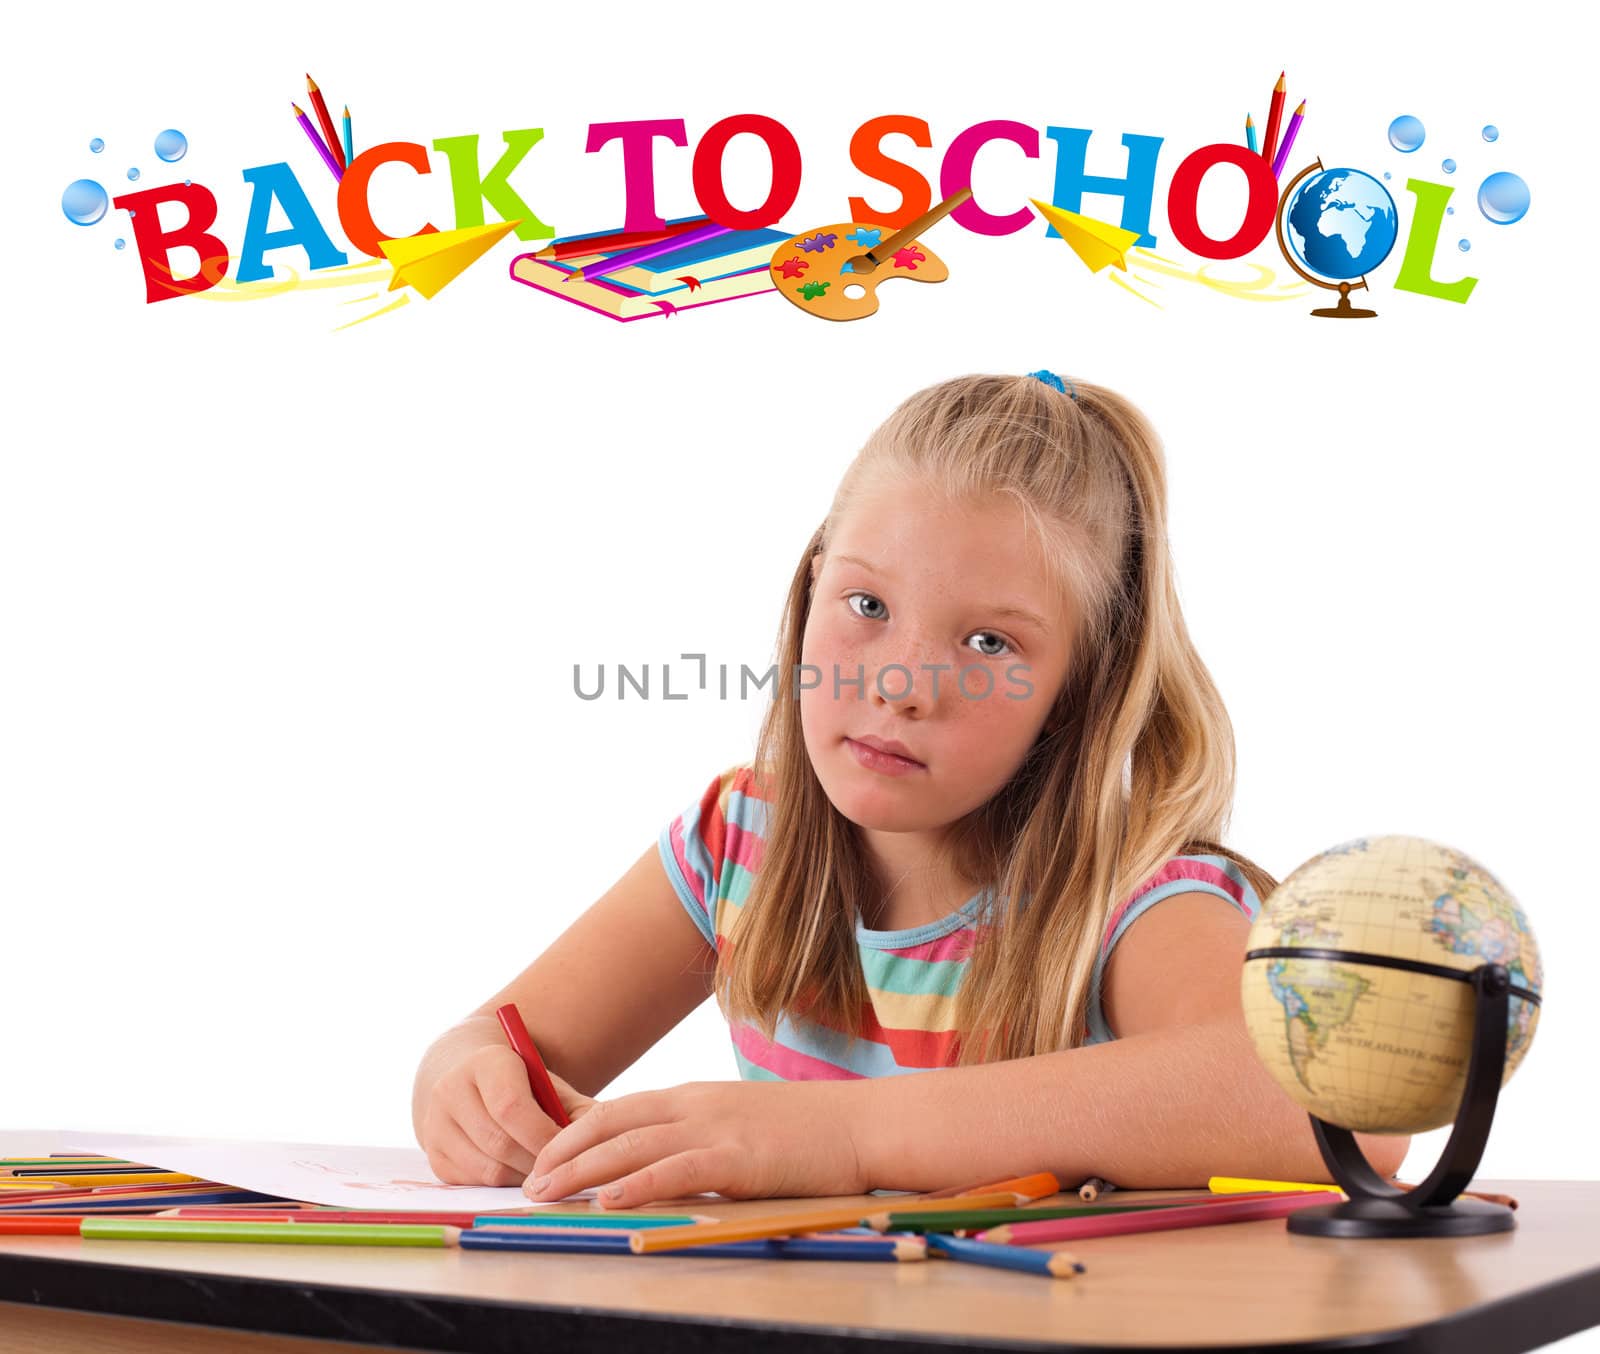 Girl with pencils and back to school theme